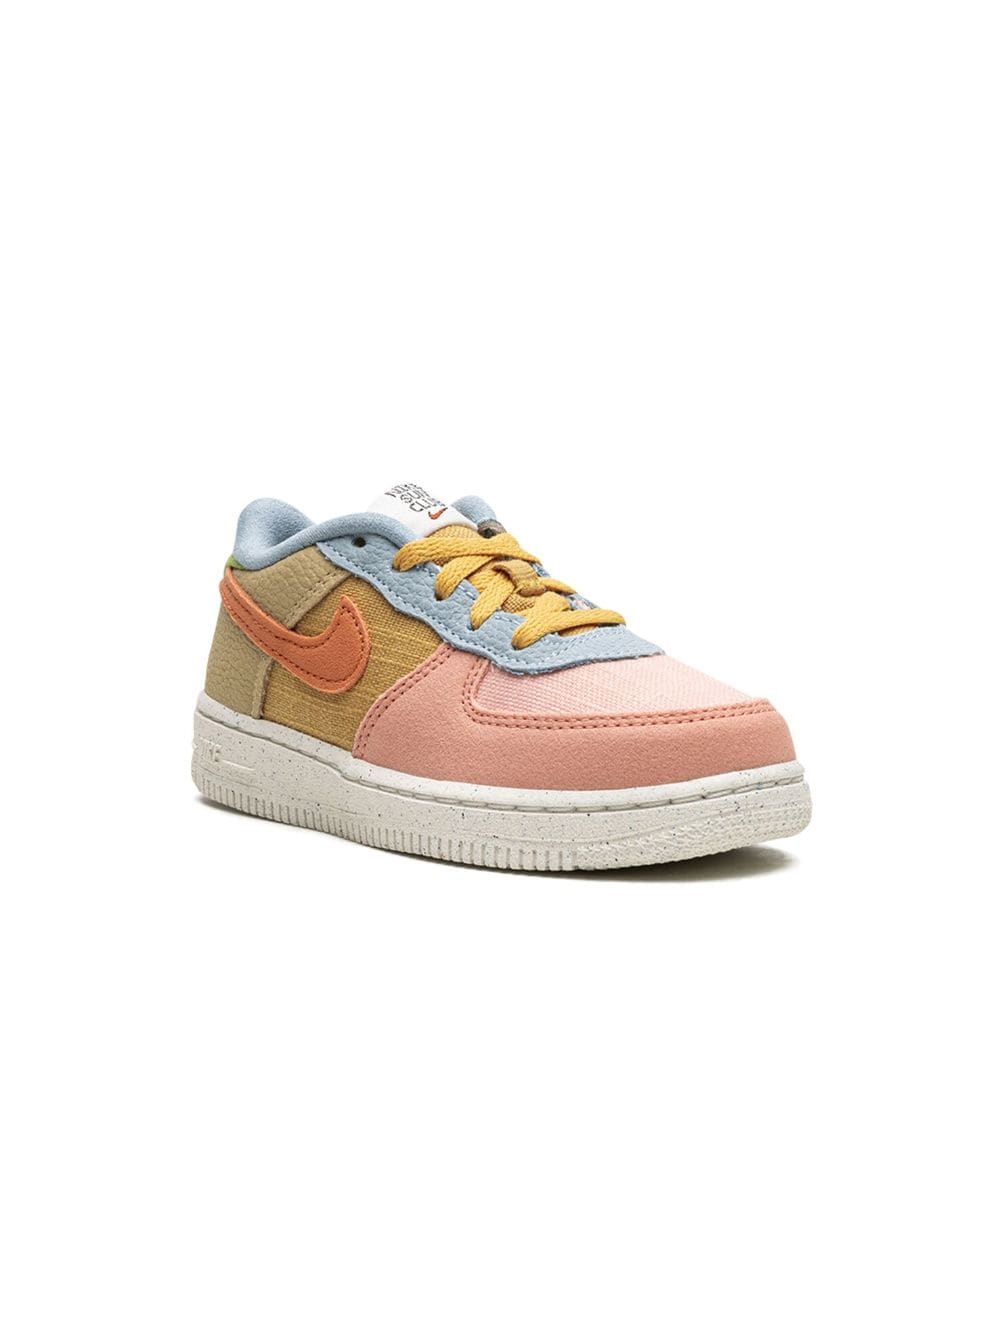 NIKE AIR FORCE 1 LV8 "NEXT NATURE" SNEAKERS